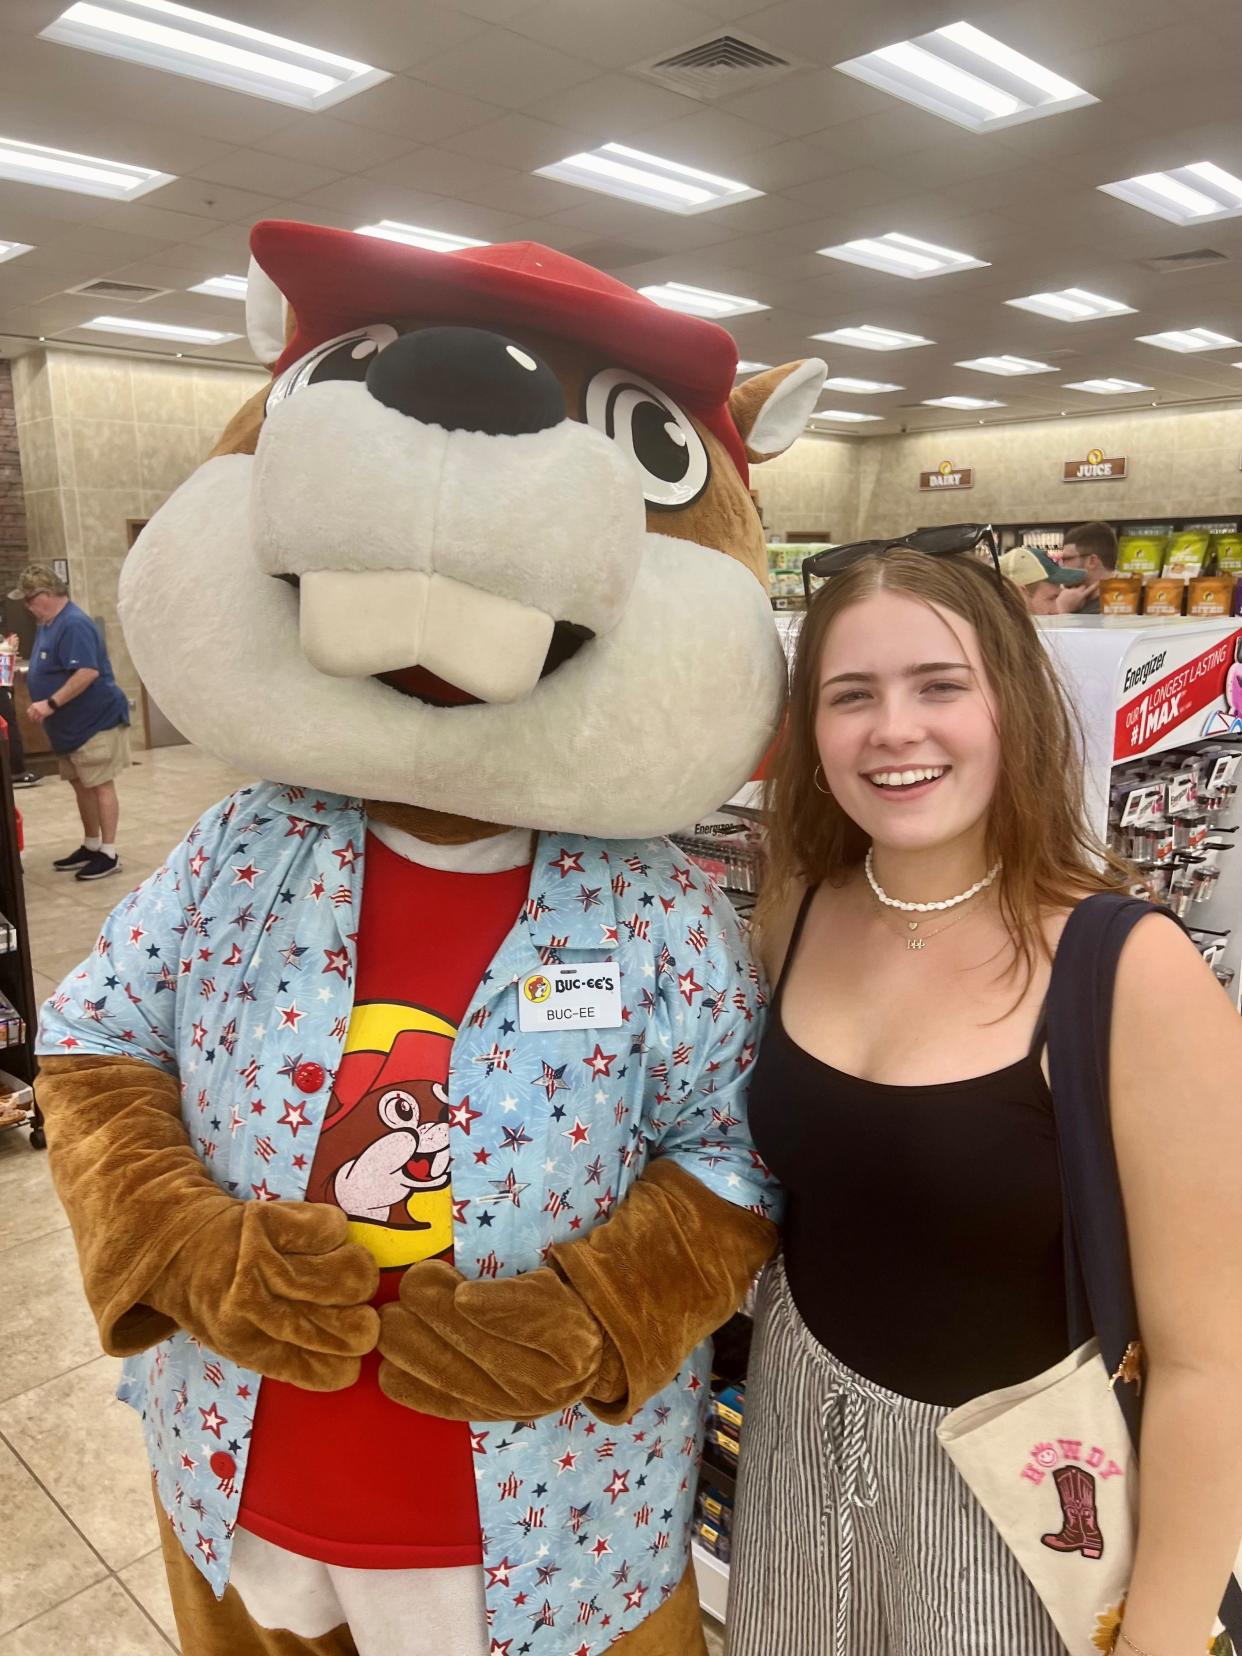 Leonie Runge, 16, an exchange student from Germany, at Buc-ee's in Athens, Ala., on May 26, 2024